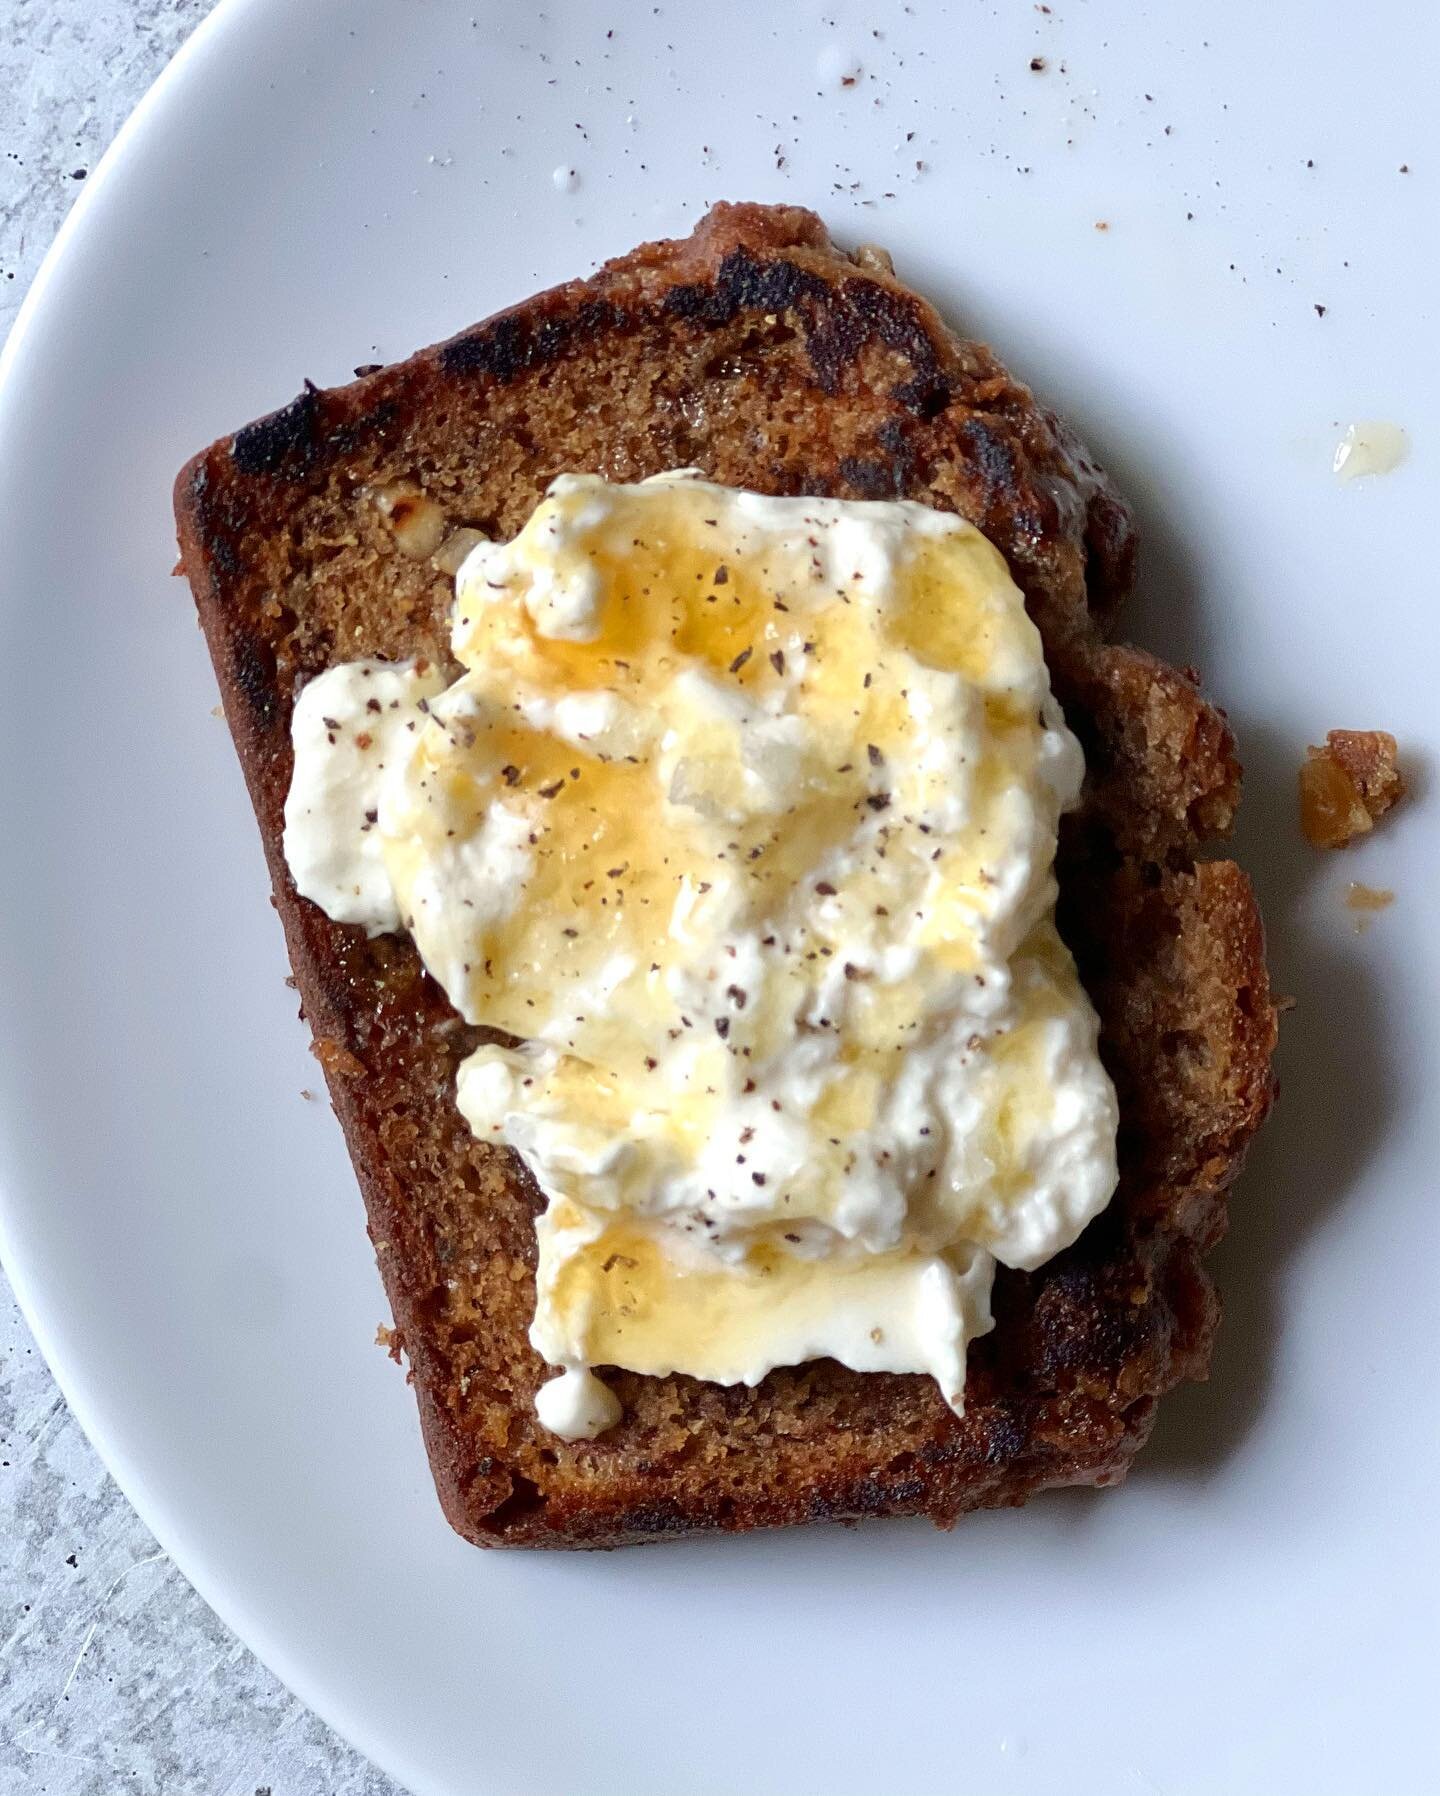 In case you&rsquo;ve ever wondered what it would be like to toast a slice of banana bread and top it with burrata, honey, flaky salt, and pepper, I can report that it is quite good. #bananabread #burrata #indulgentbreakfast